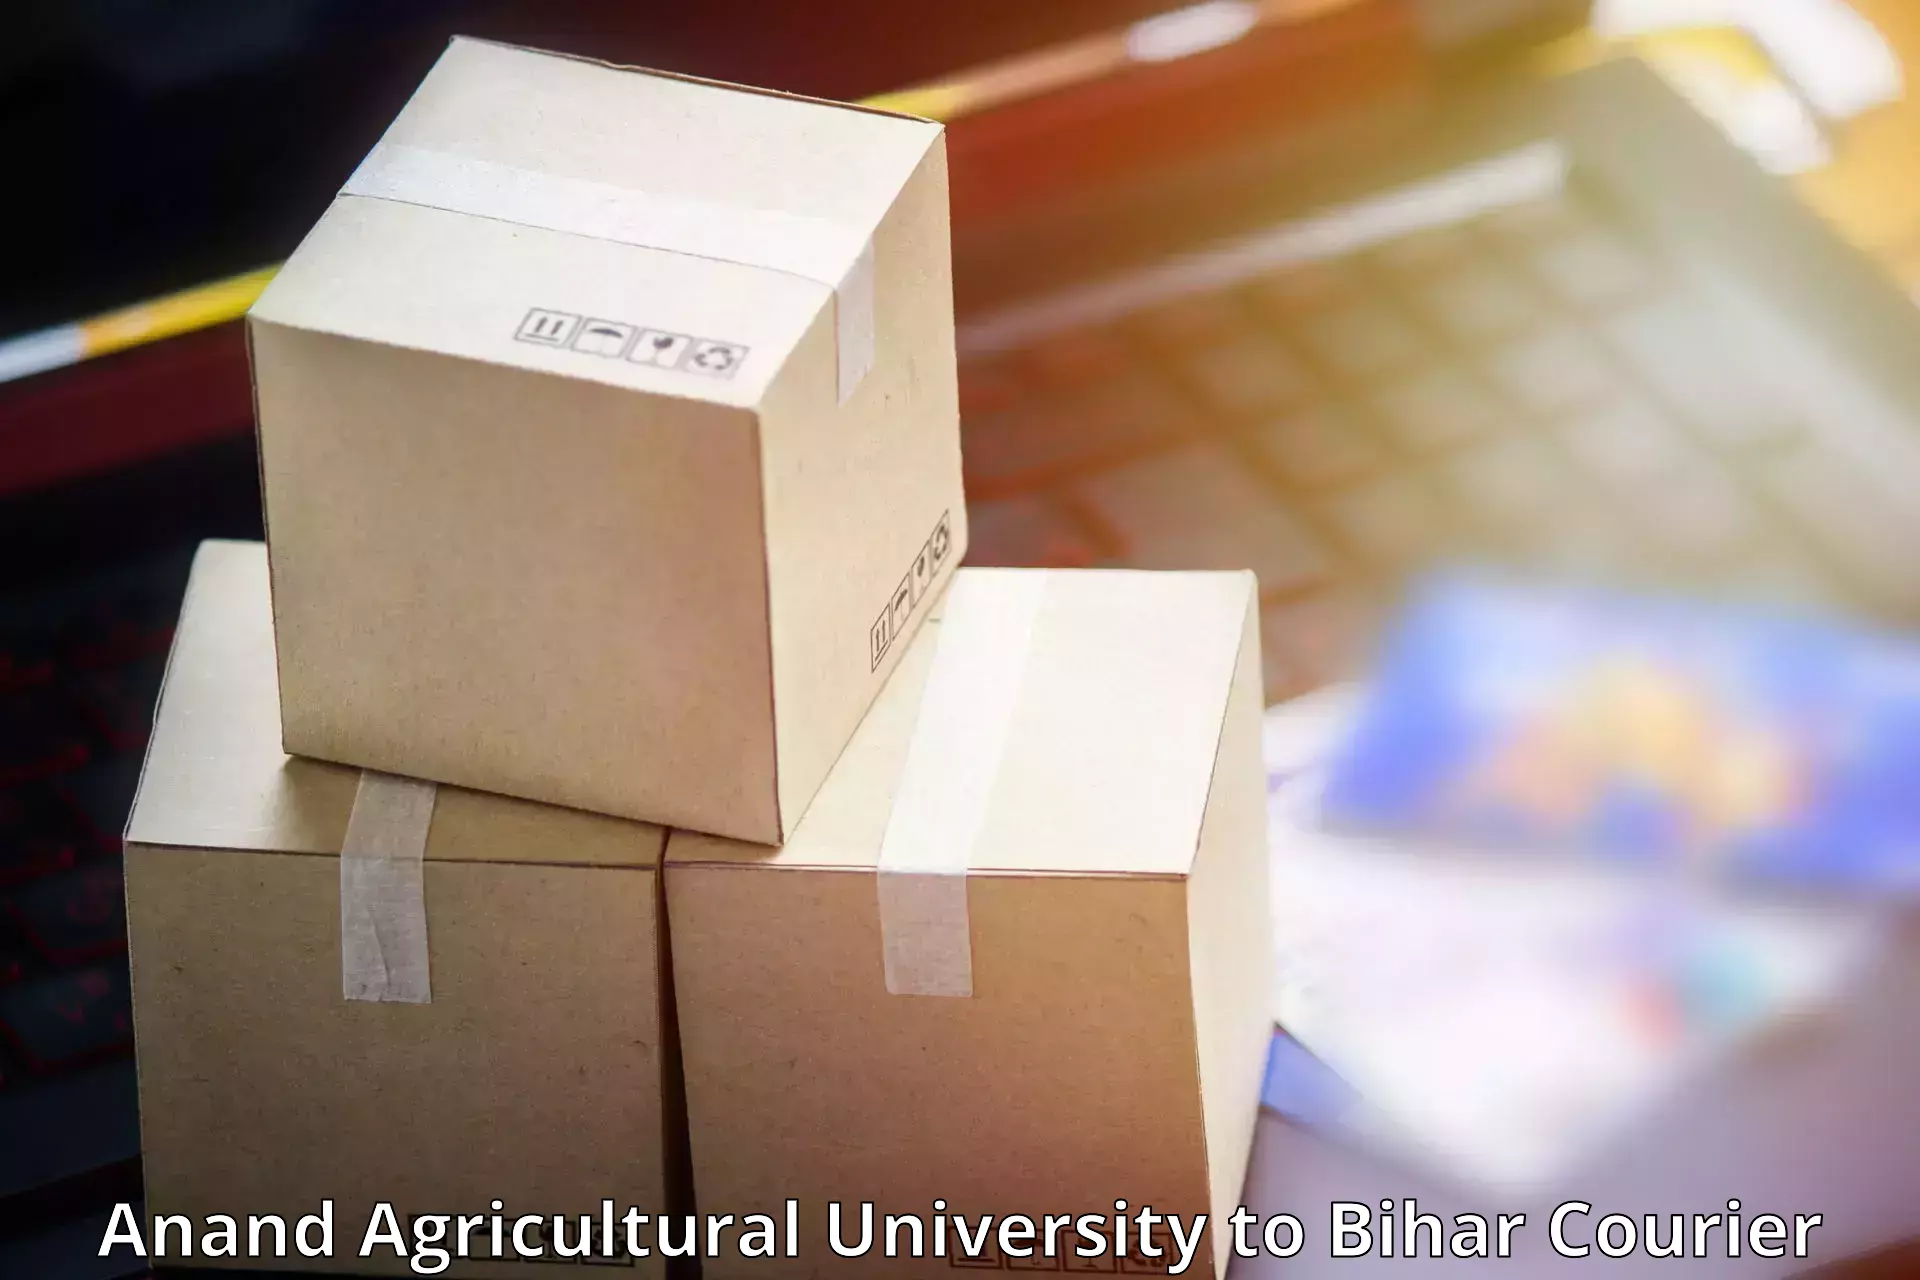 Express logistics providers Anand Agricultural University to Motihari